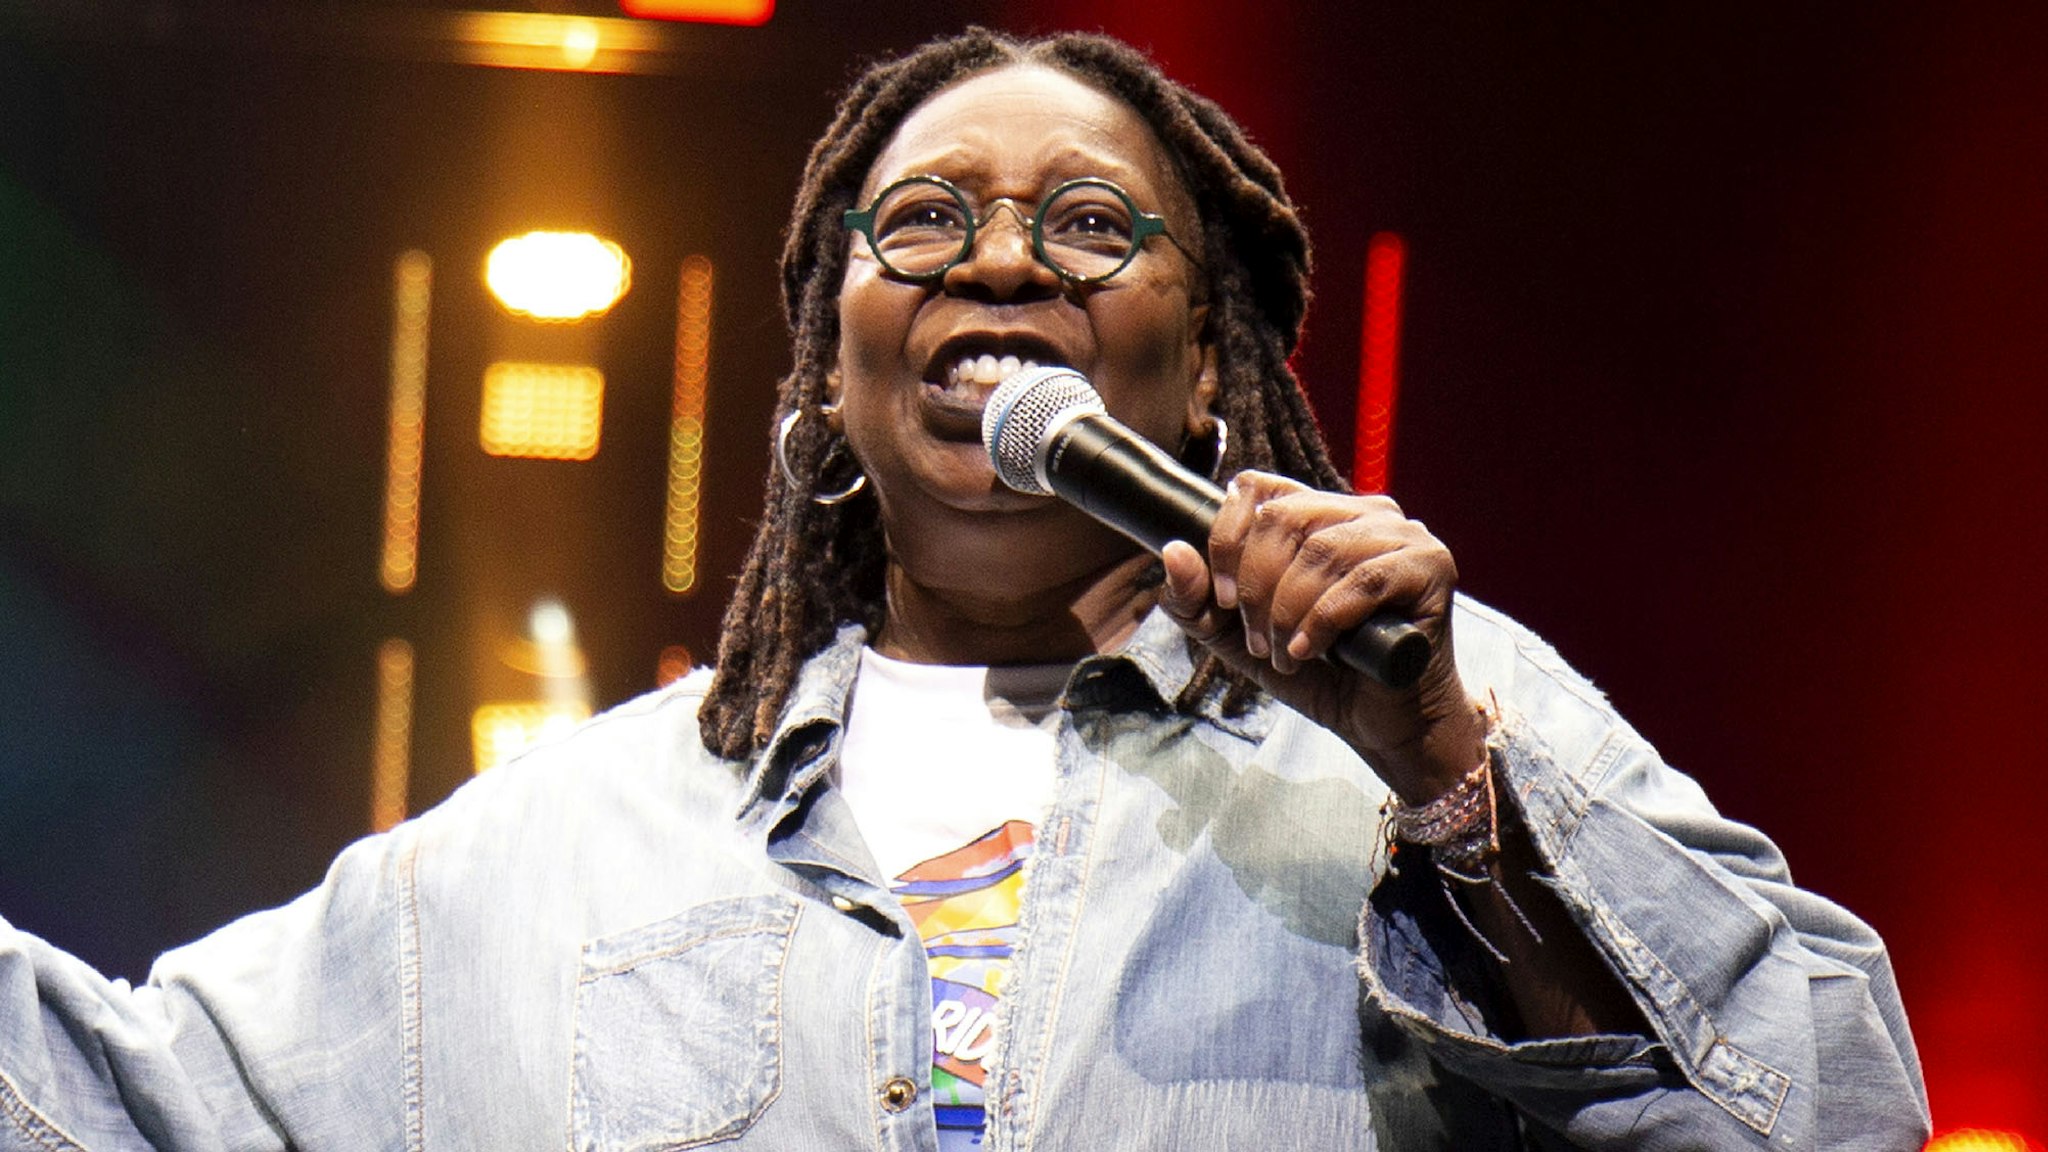 NEW YORK, NEW YORK - JUNE 26: Whoopi Goldberg onstage during Opening Ceremony 'WorldPride NYC 2019' at Barclays Center on June 26, 2019 in New York City.